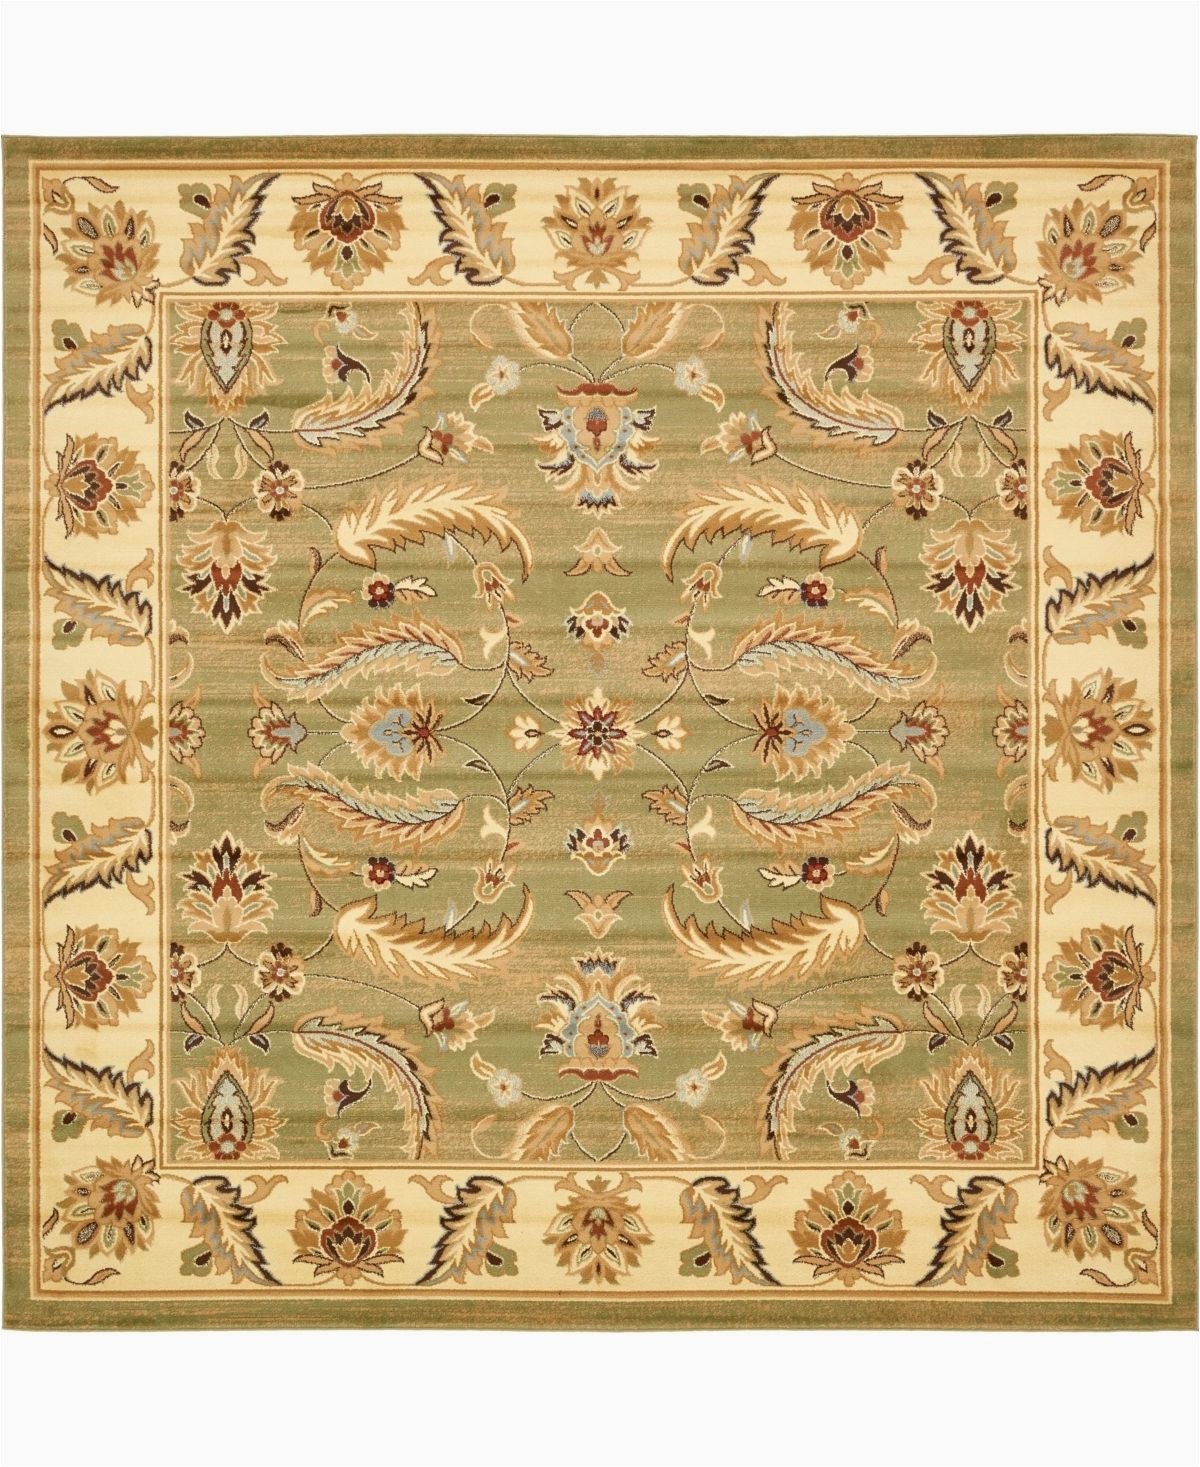 10 by 10 Square area Rugs Bridgeport Home Passage Psg1 Green 10 X 10 Square area Rug